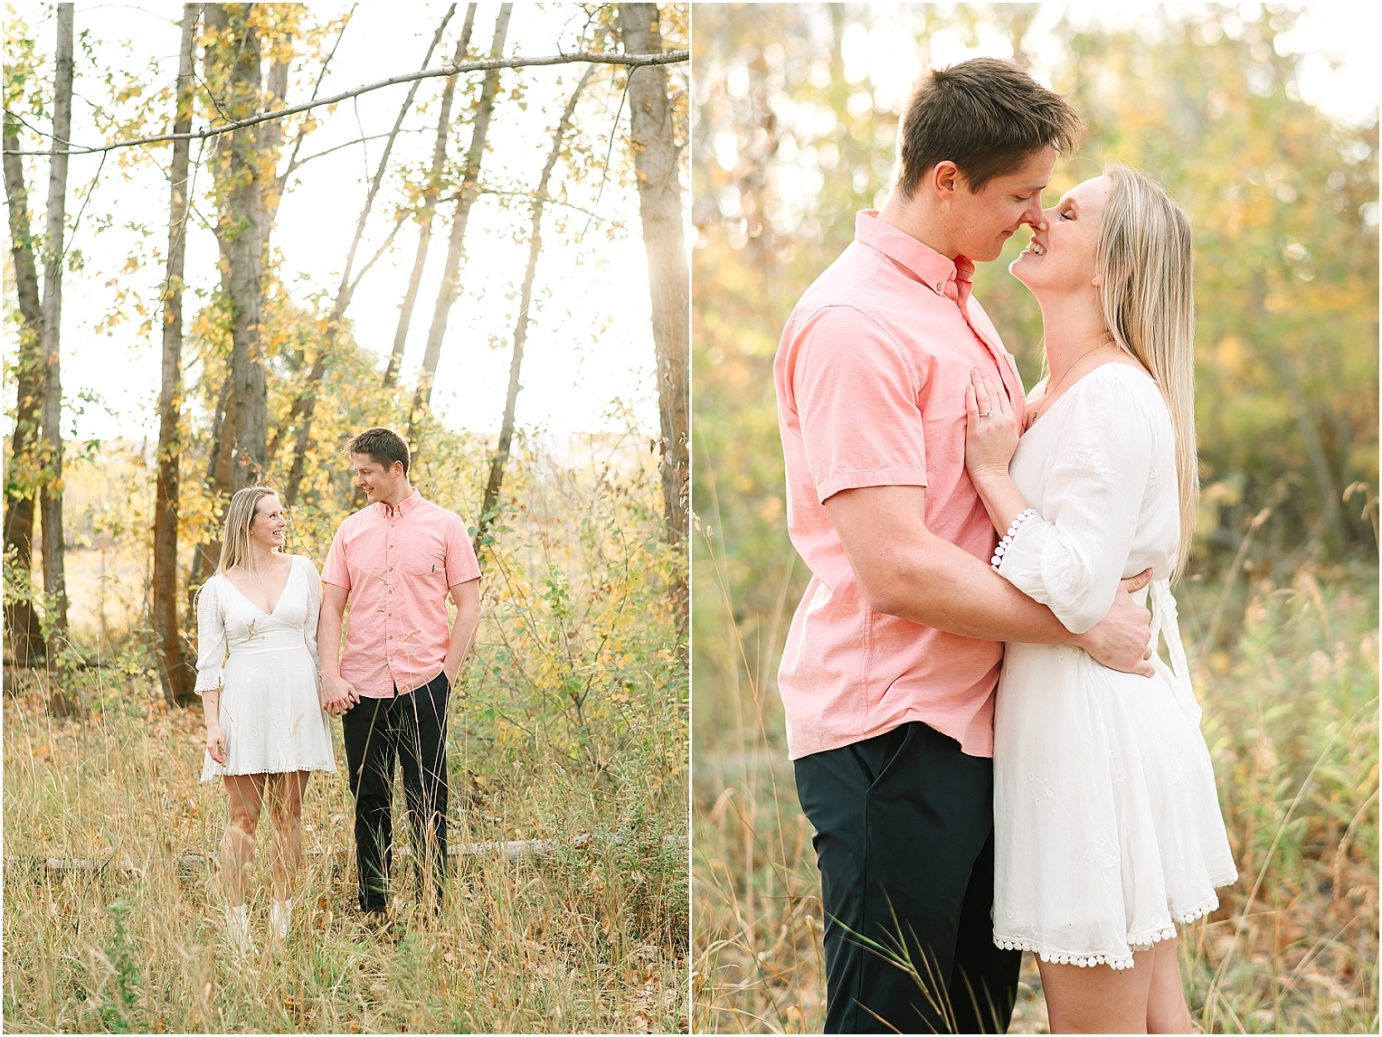 Joyful fall engagement session Cental WA Brad and Jasmine walking next to each other in trees